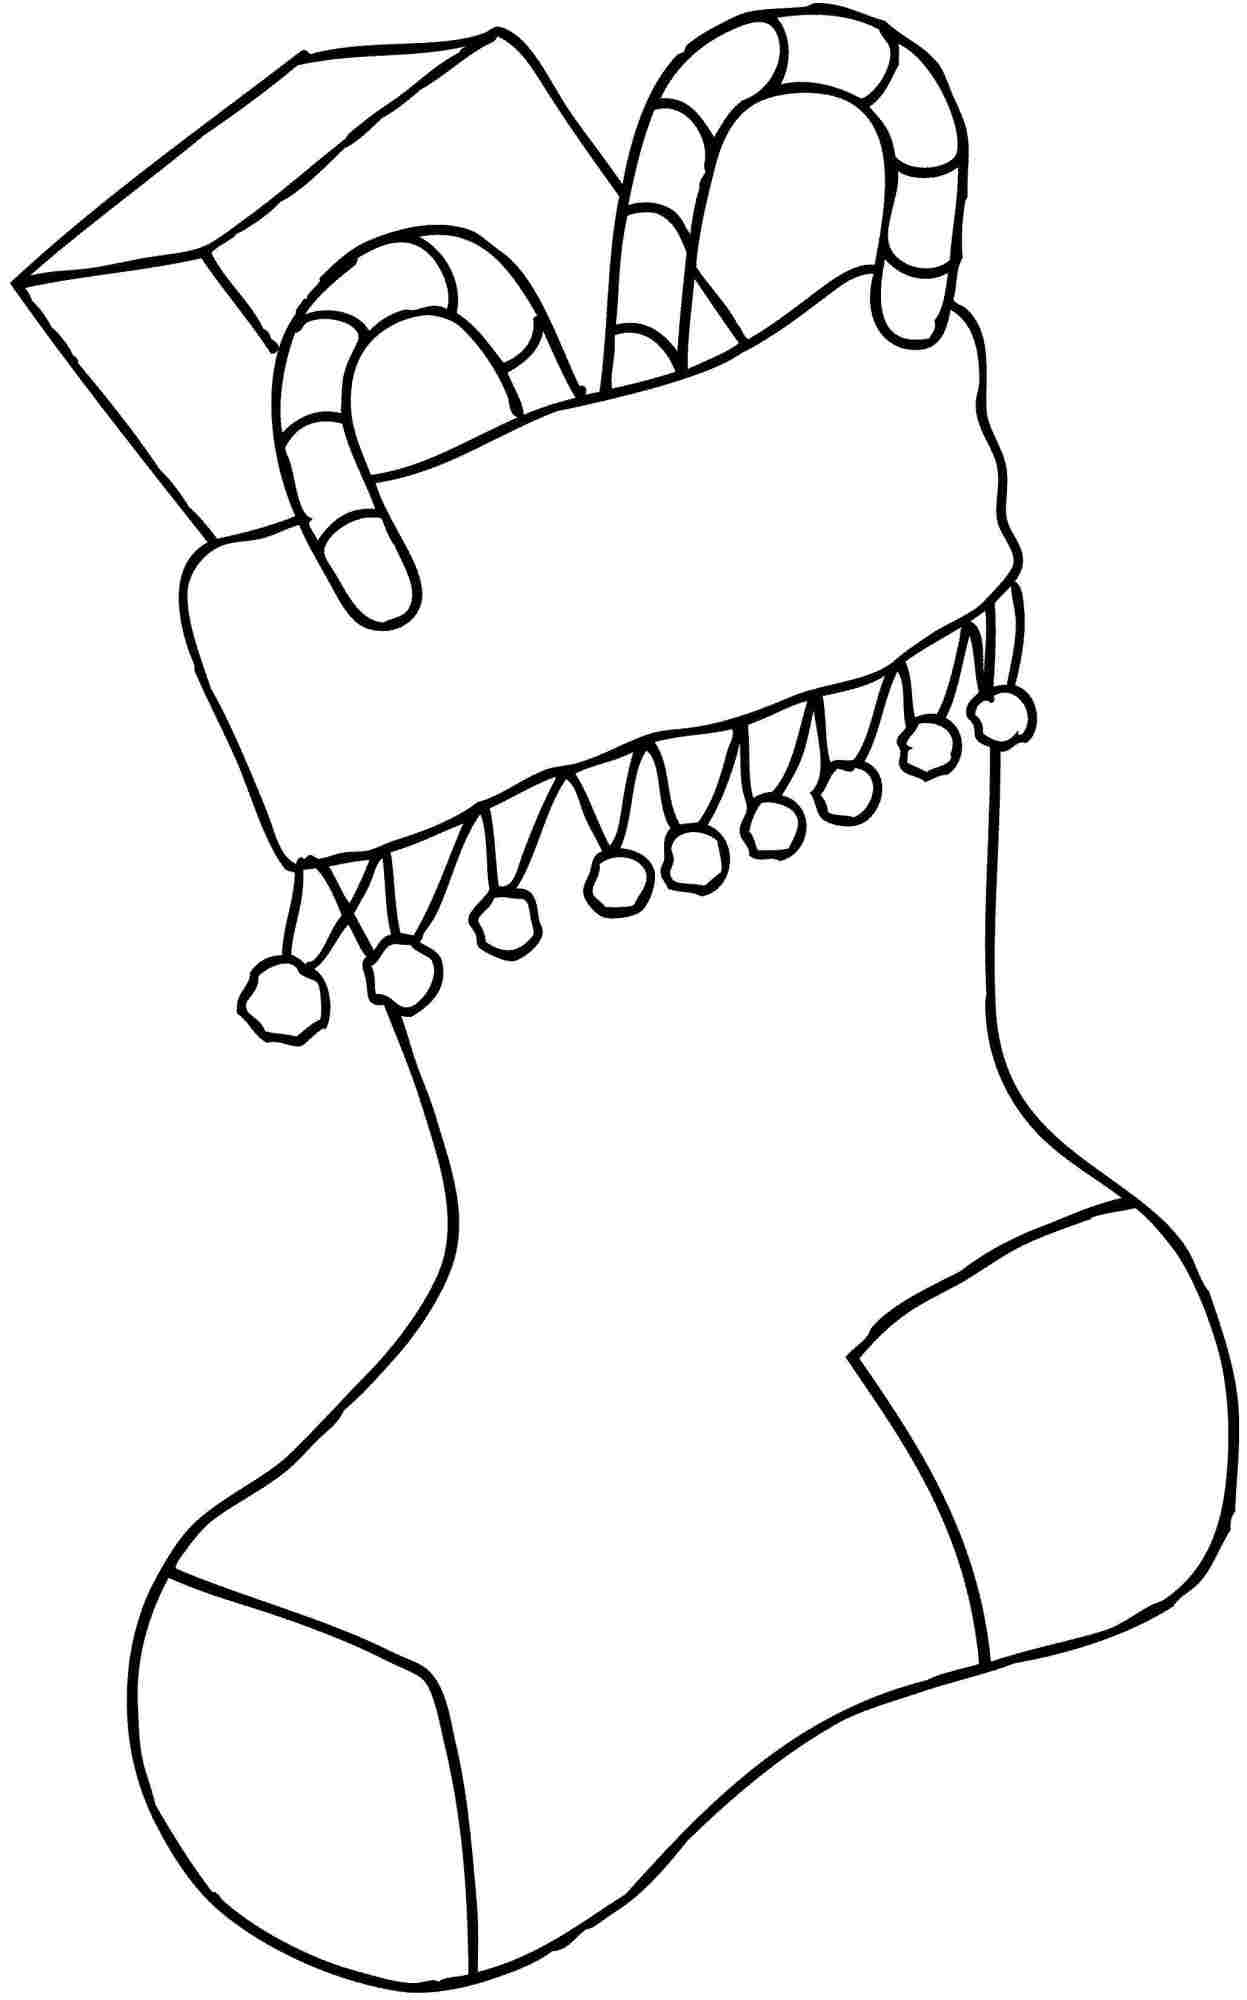 Plain Christmas Stocking Coloring Pages at GetColorings ...